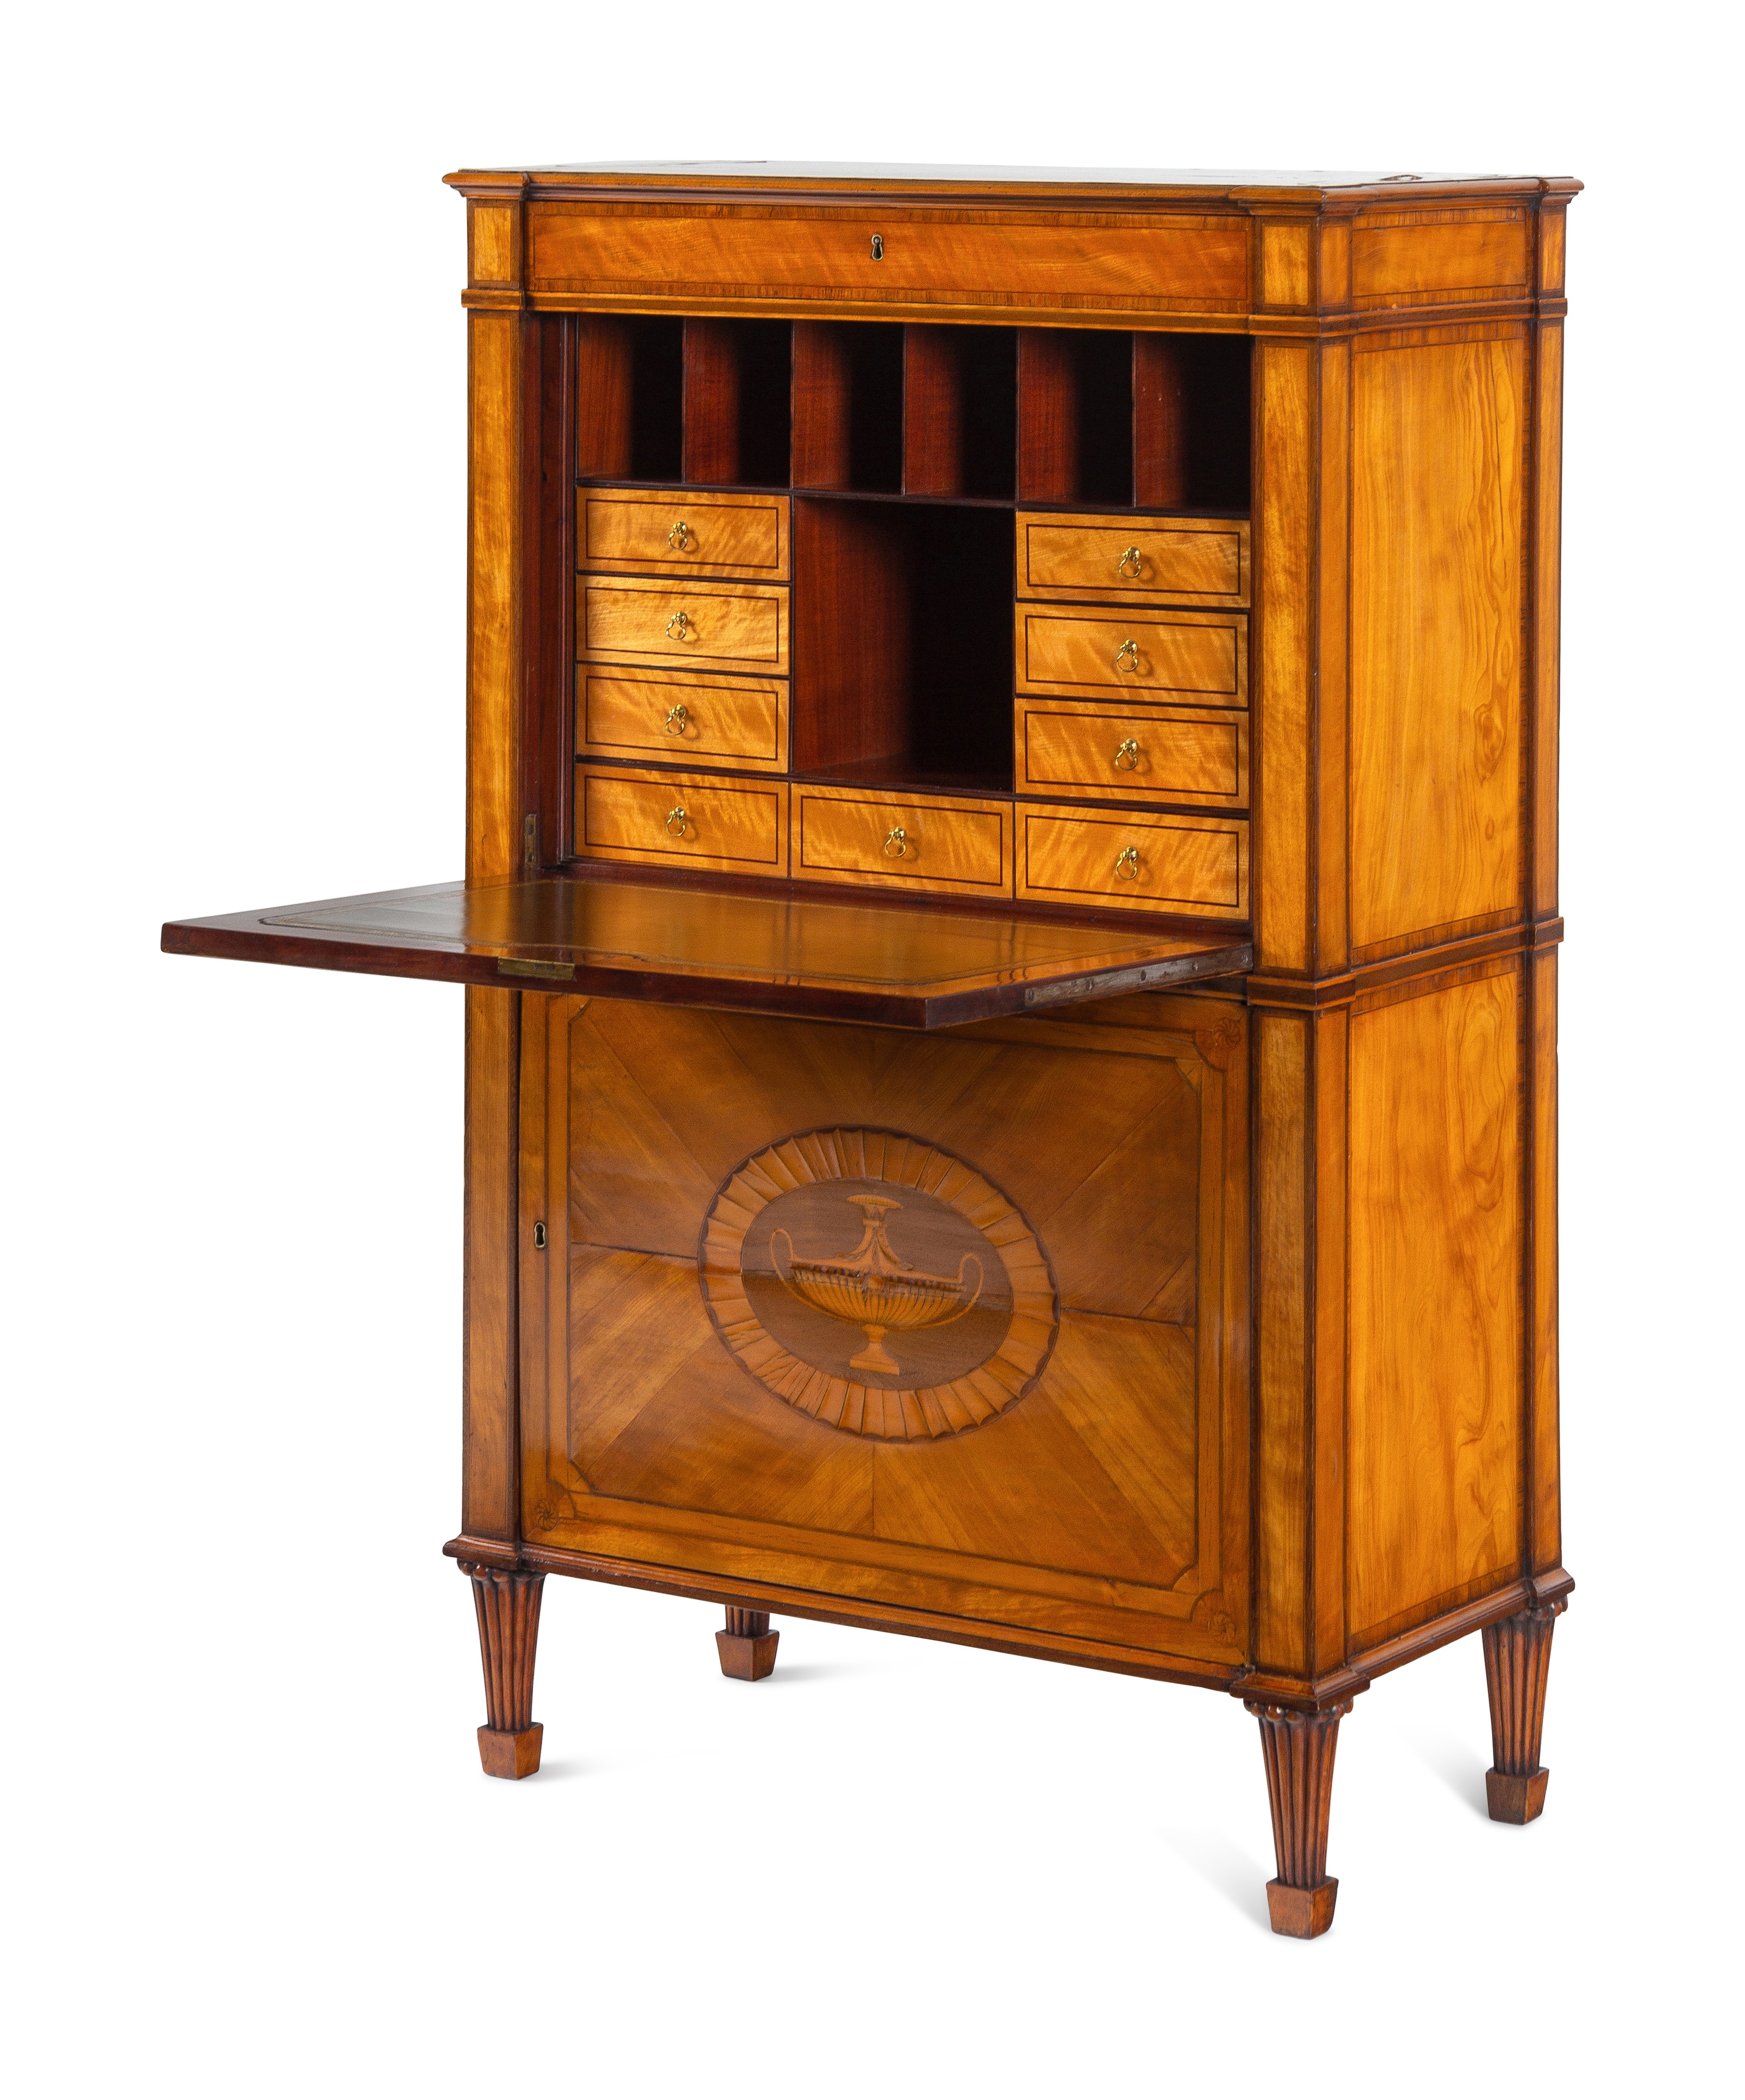 A George III Satinwood, Tulipwood and Amaranth Marquetry Fall-Front Secretaire - Image 3 of 11